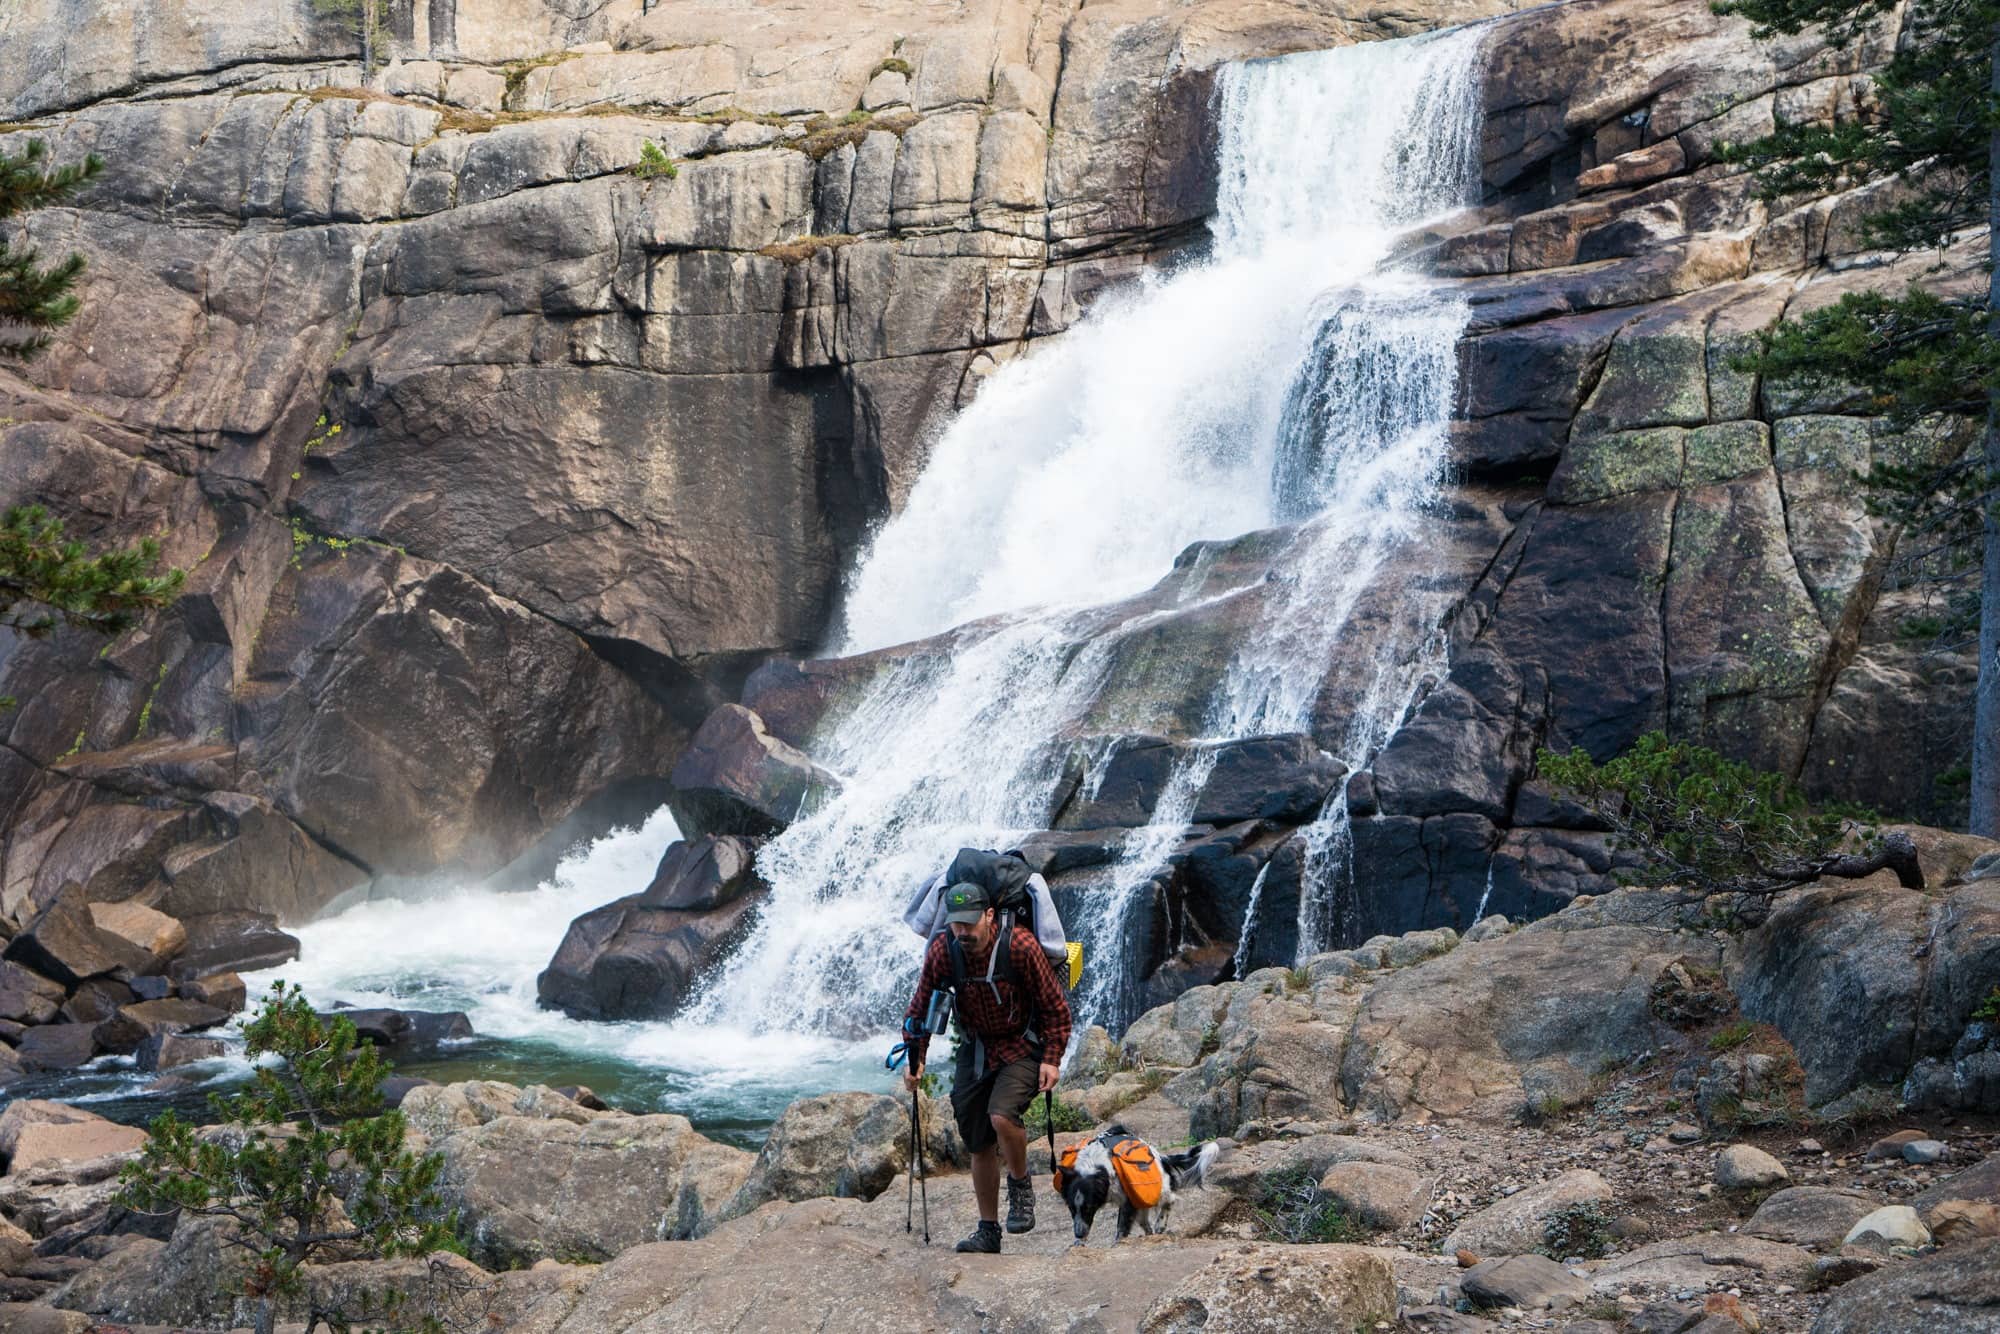 Want to take your canine companion on the trail? Learn how to safely go backpacking with a dog with these 12 dog backpacking tips, including dog nutrition & hydration, dog backpacking gear, leave no trace best practices, and training. 